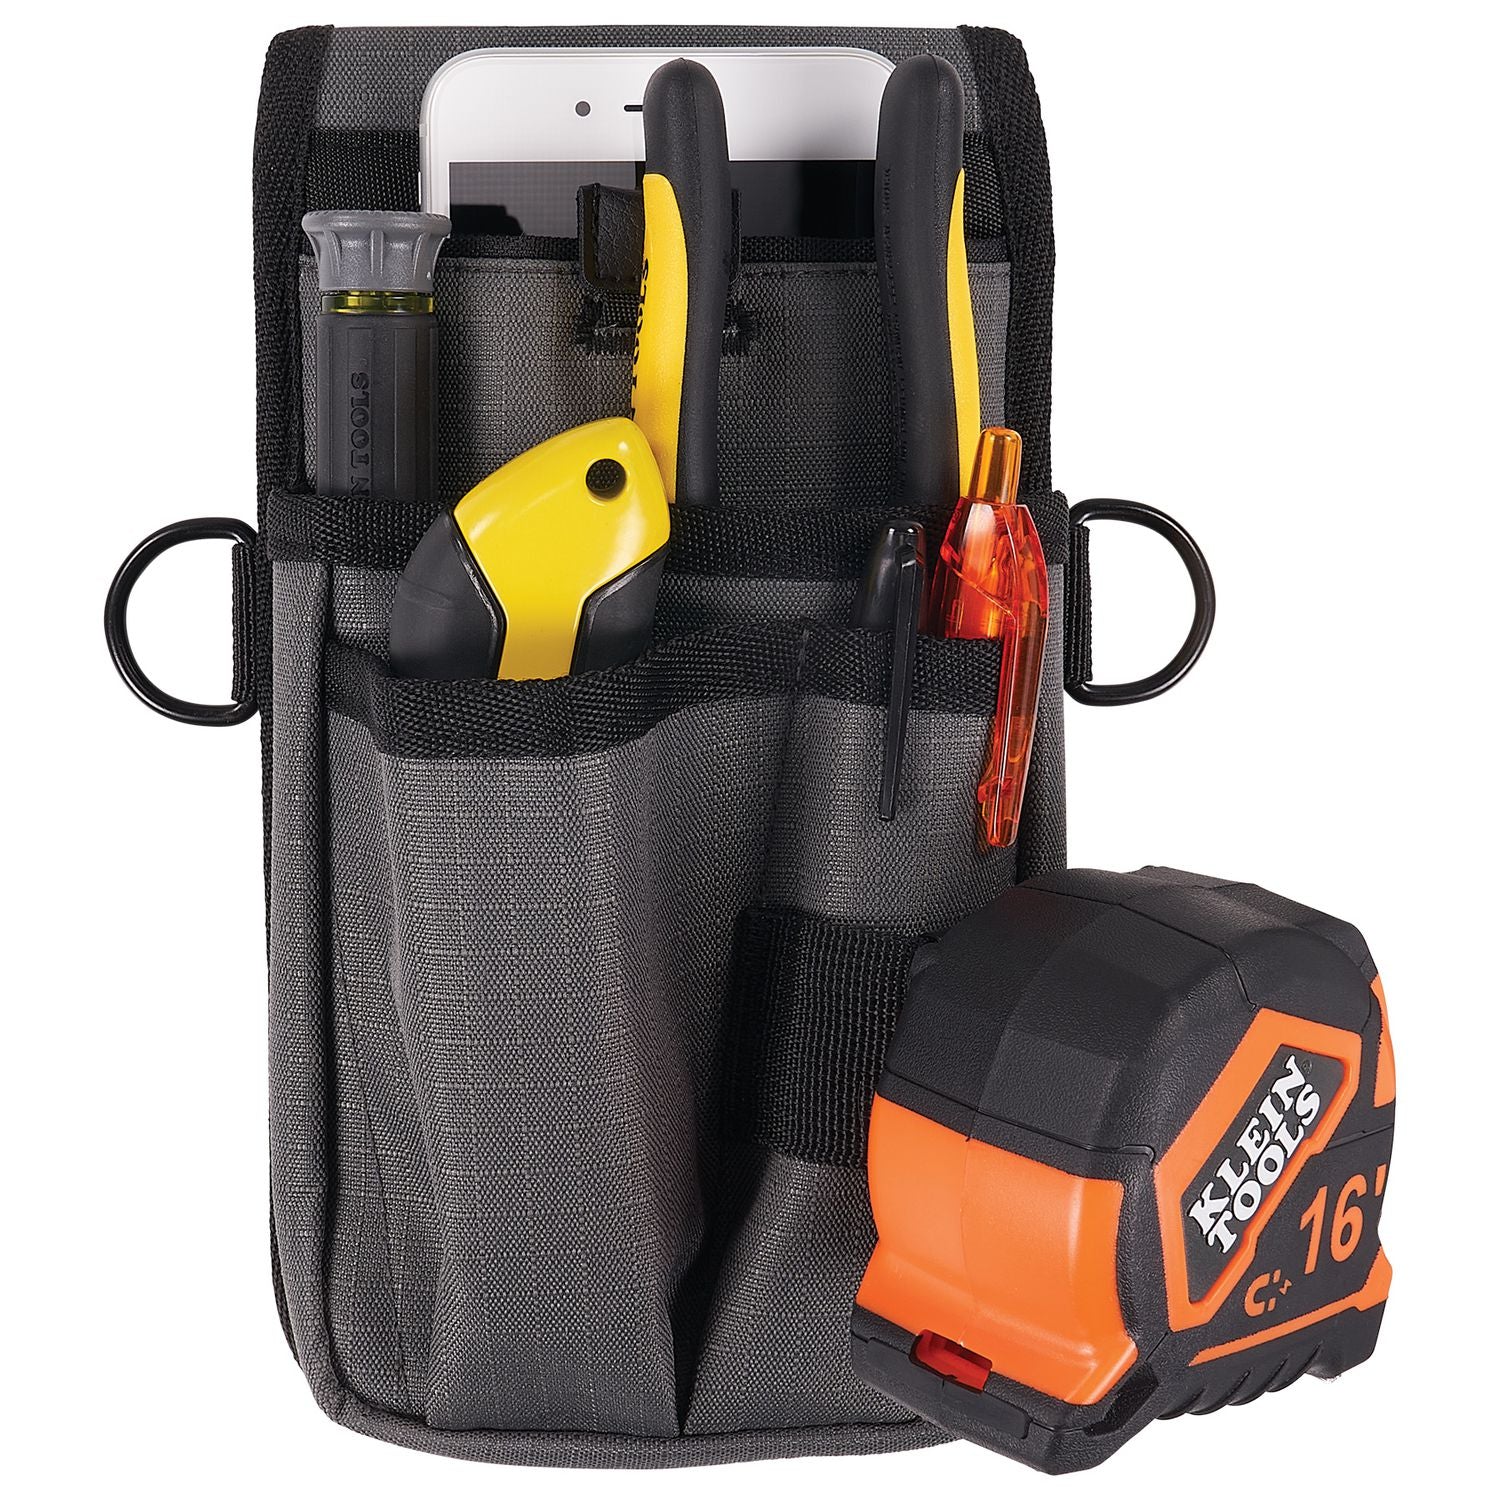 arsenal-5569-belt-clip-tool-pouch-with-device-holster-4-compartments-5-x-2-x-85-polyester-gray-ships-in-1-3-bus-days_ego13669 - 2